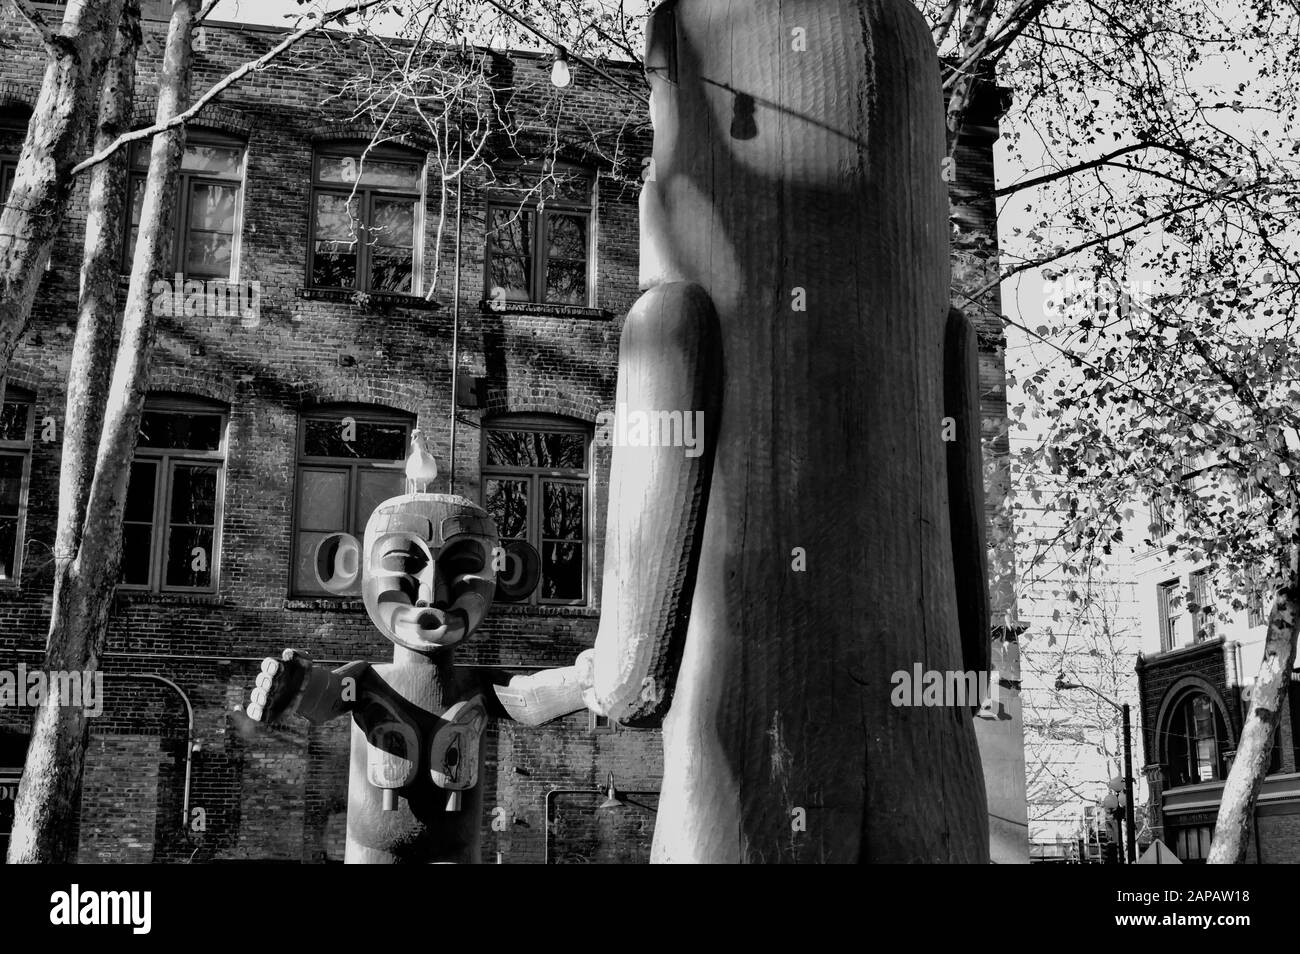 Native American Art in the form of wooden Totem Poles in Pioneer Square, Seattle, Washington State, USA. Shot in black and white. Stock Photo